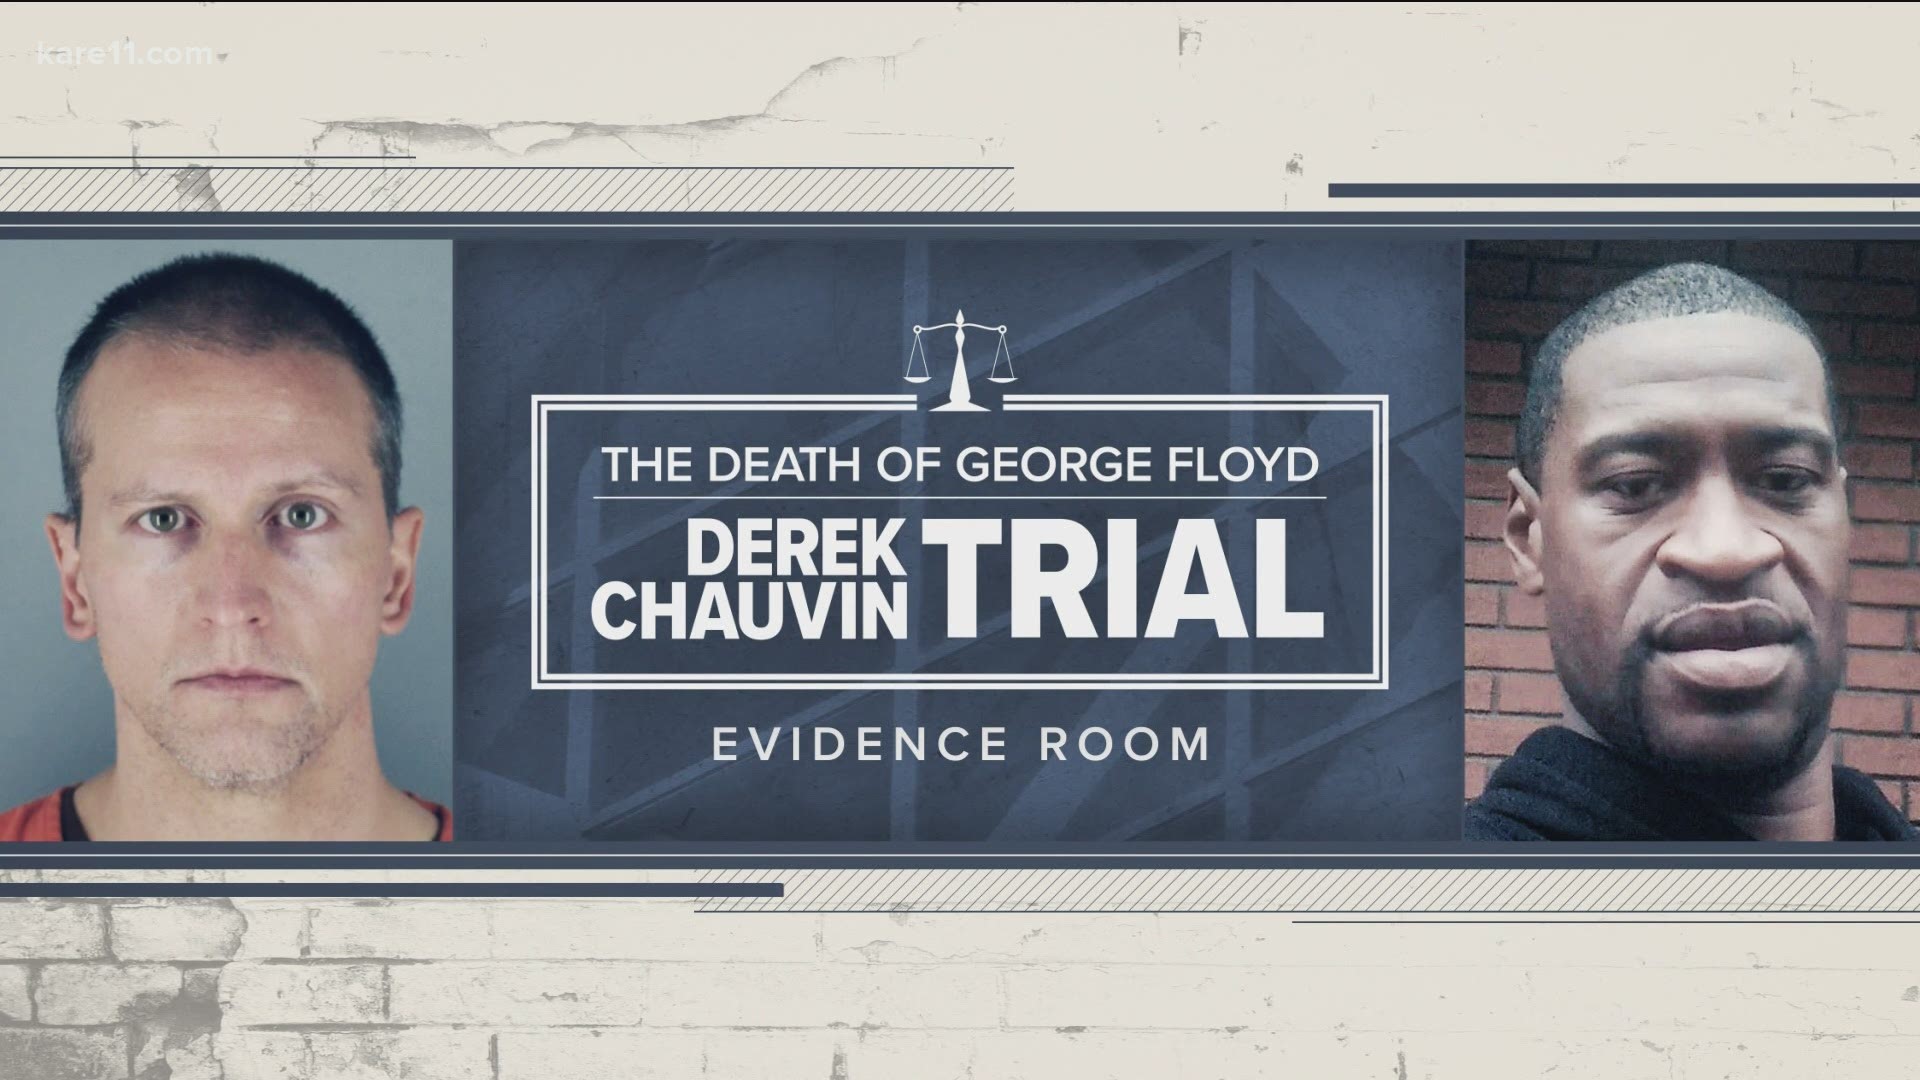 Even if using a knee to control a suspect is justified, the jury in Derek Chauvin’s murder trial may still ask why George Floyd was held down after he passed out.